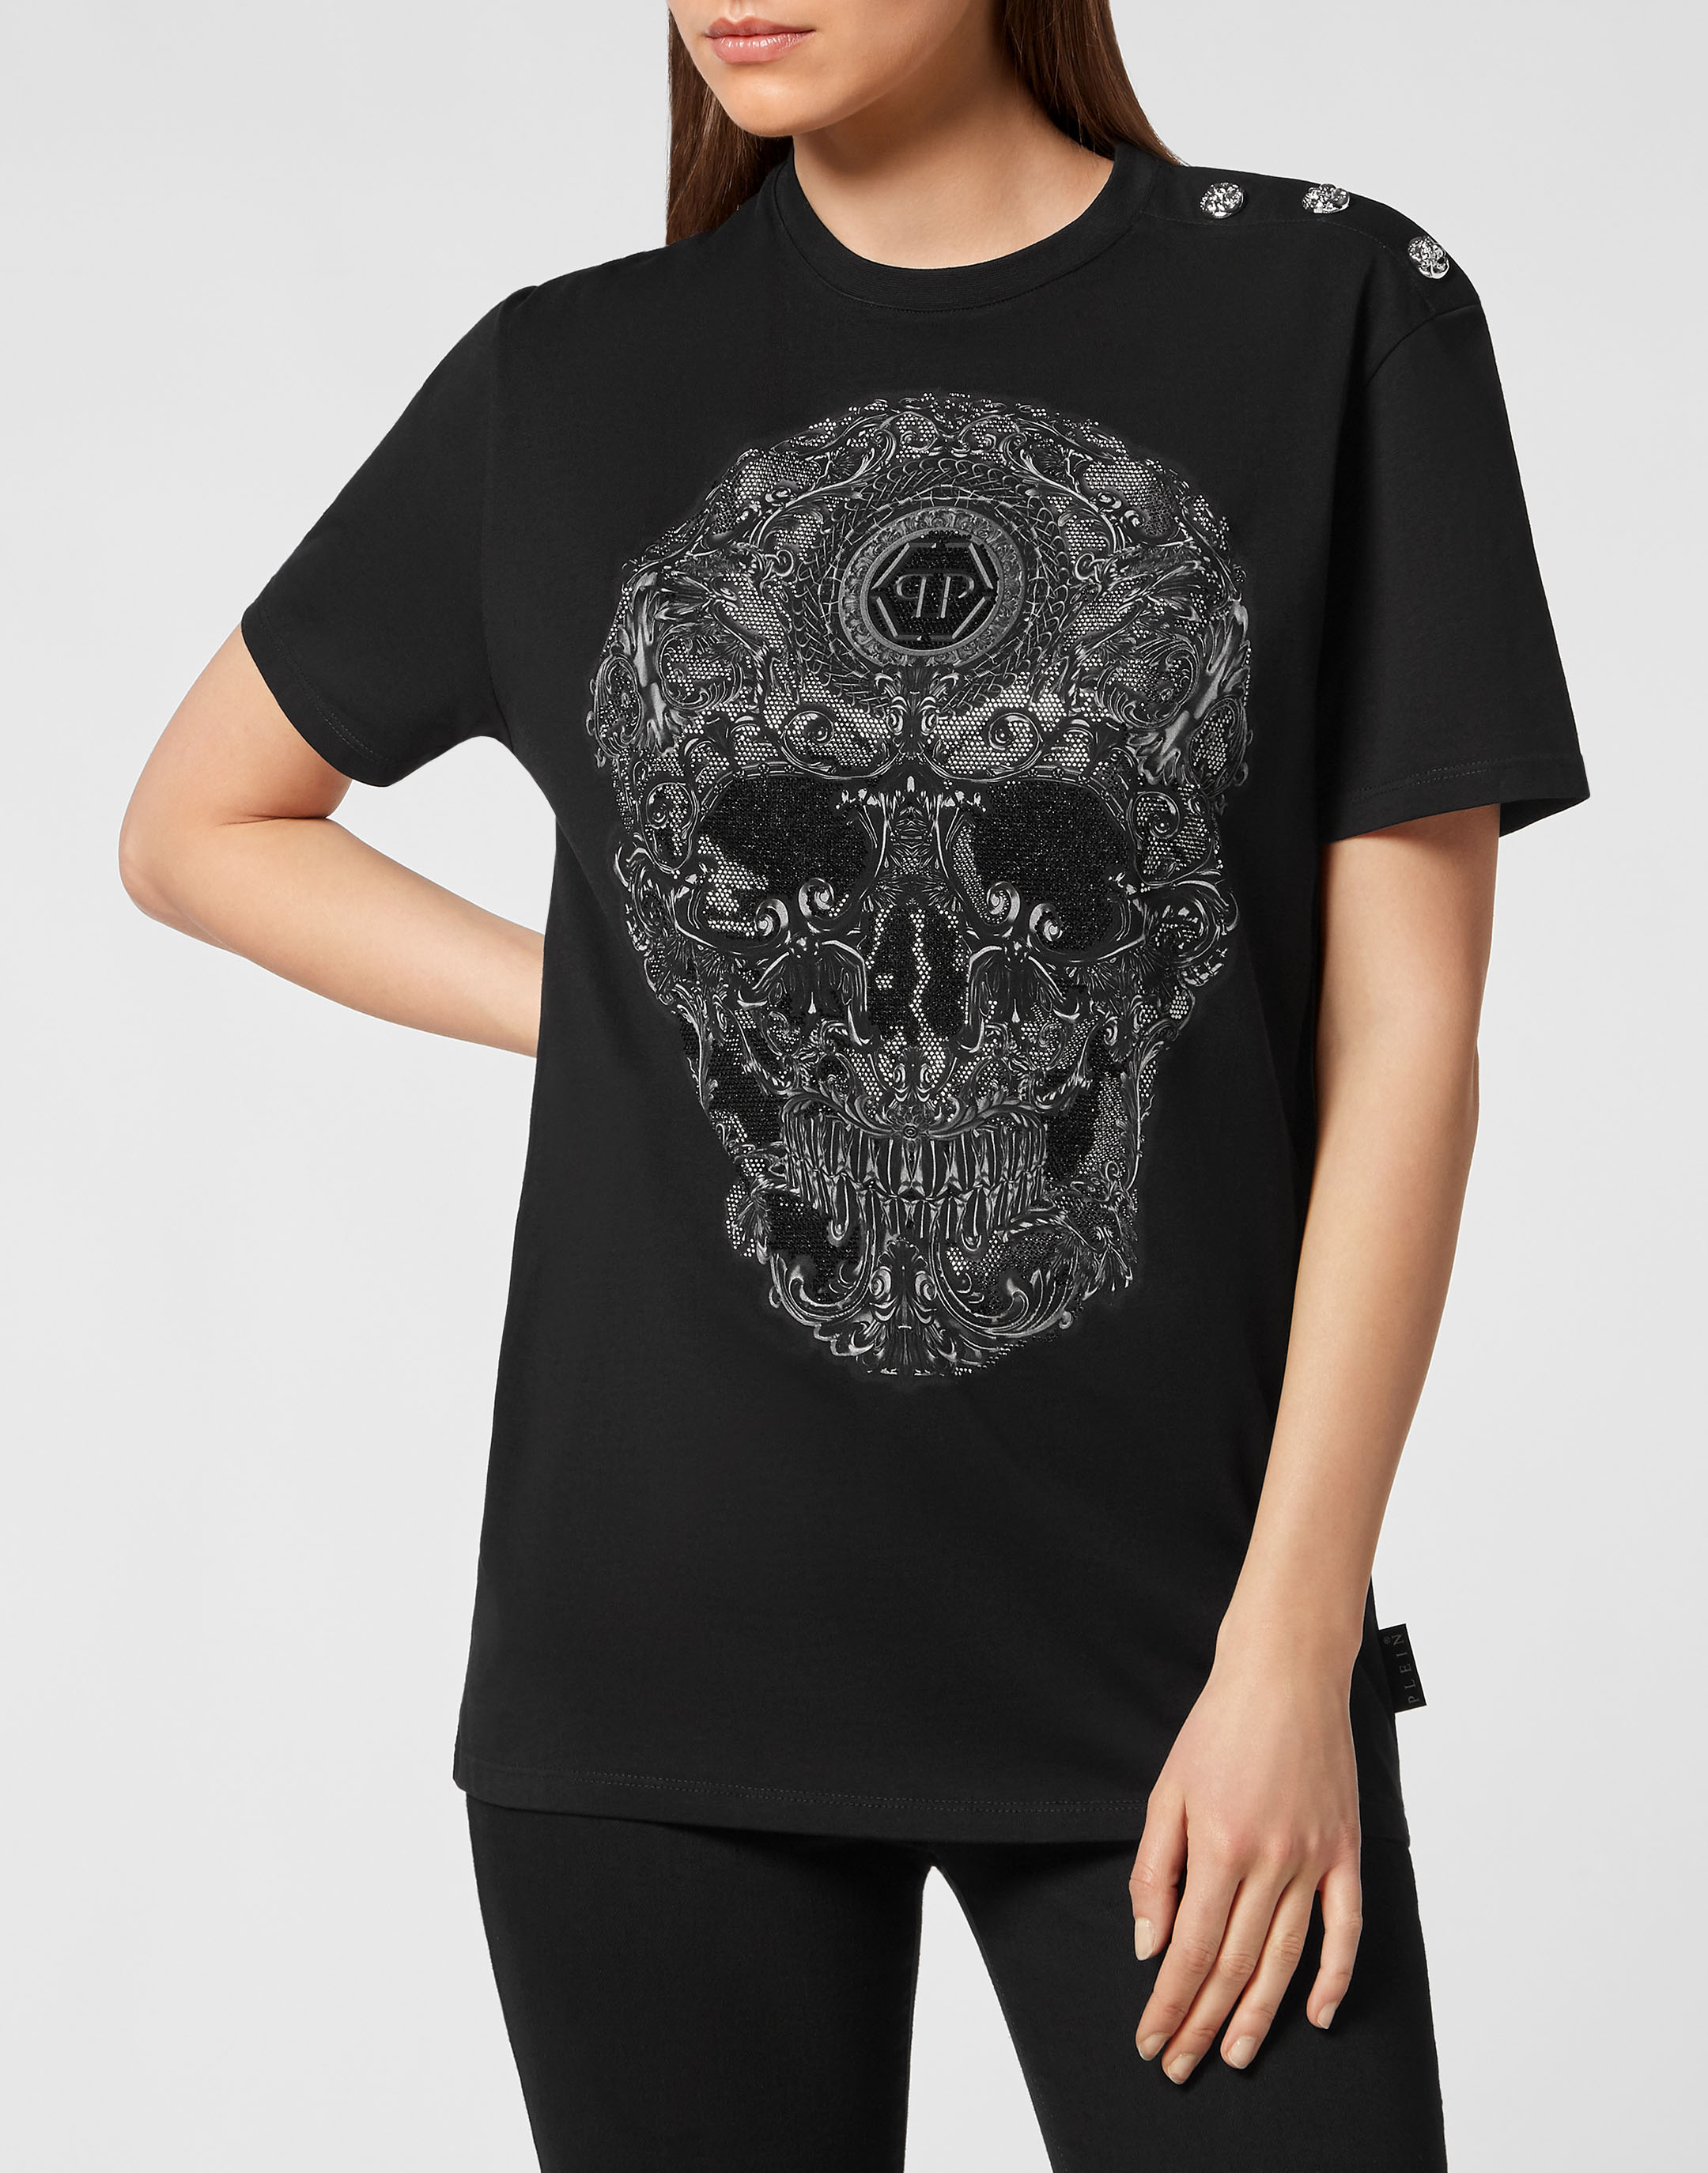 T-shirt Man Fit Baroque with Crystals | Philipp Plein Outlet